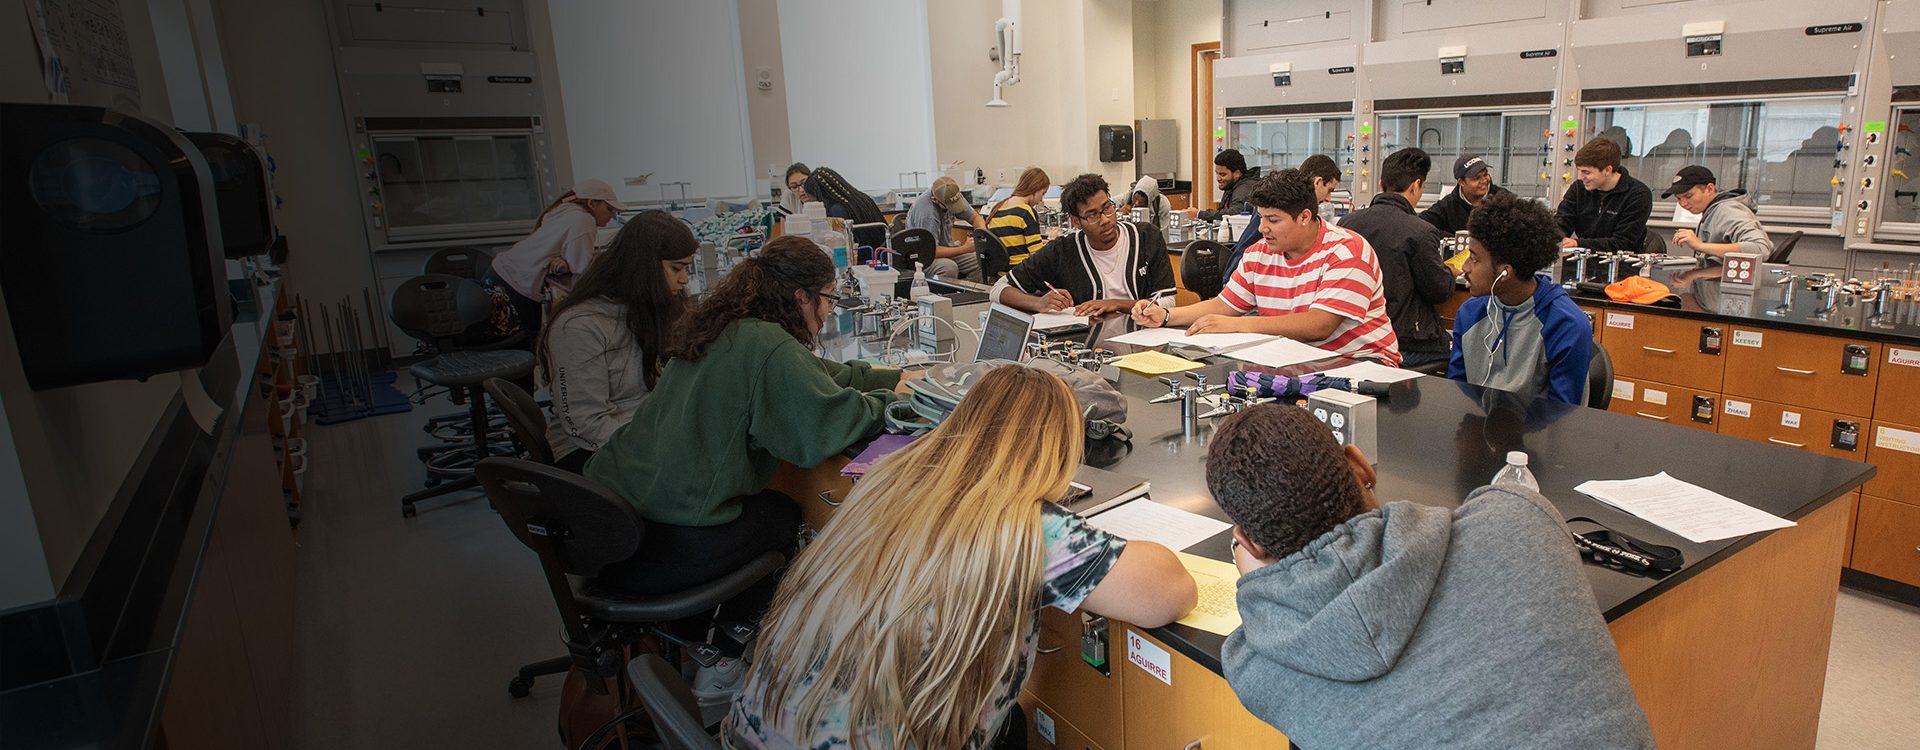 Students working together on group projects in a laboratory class